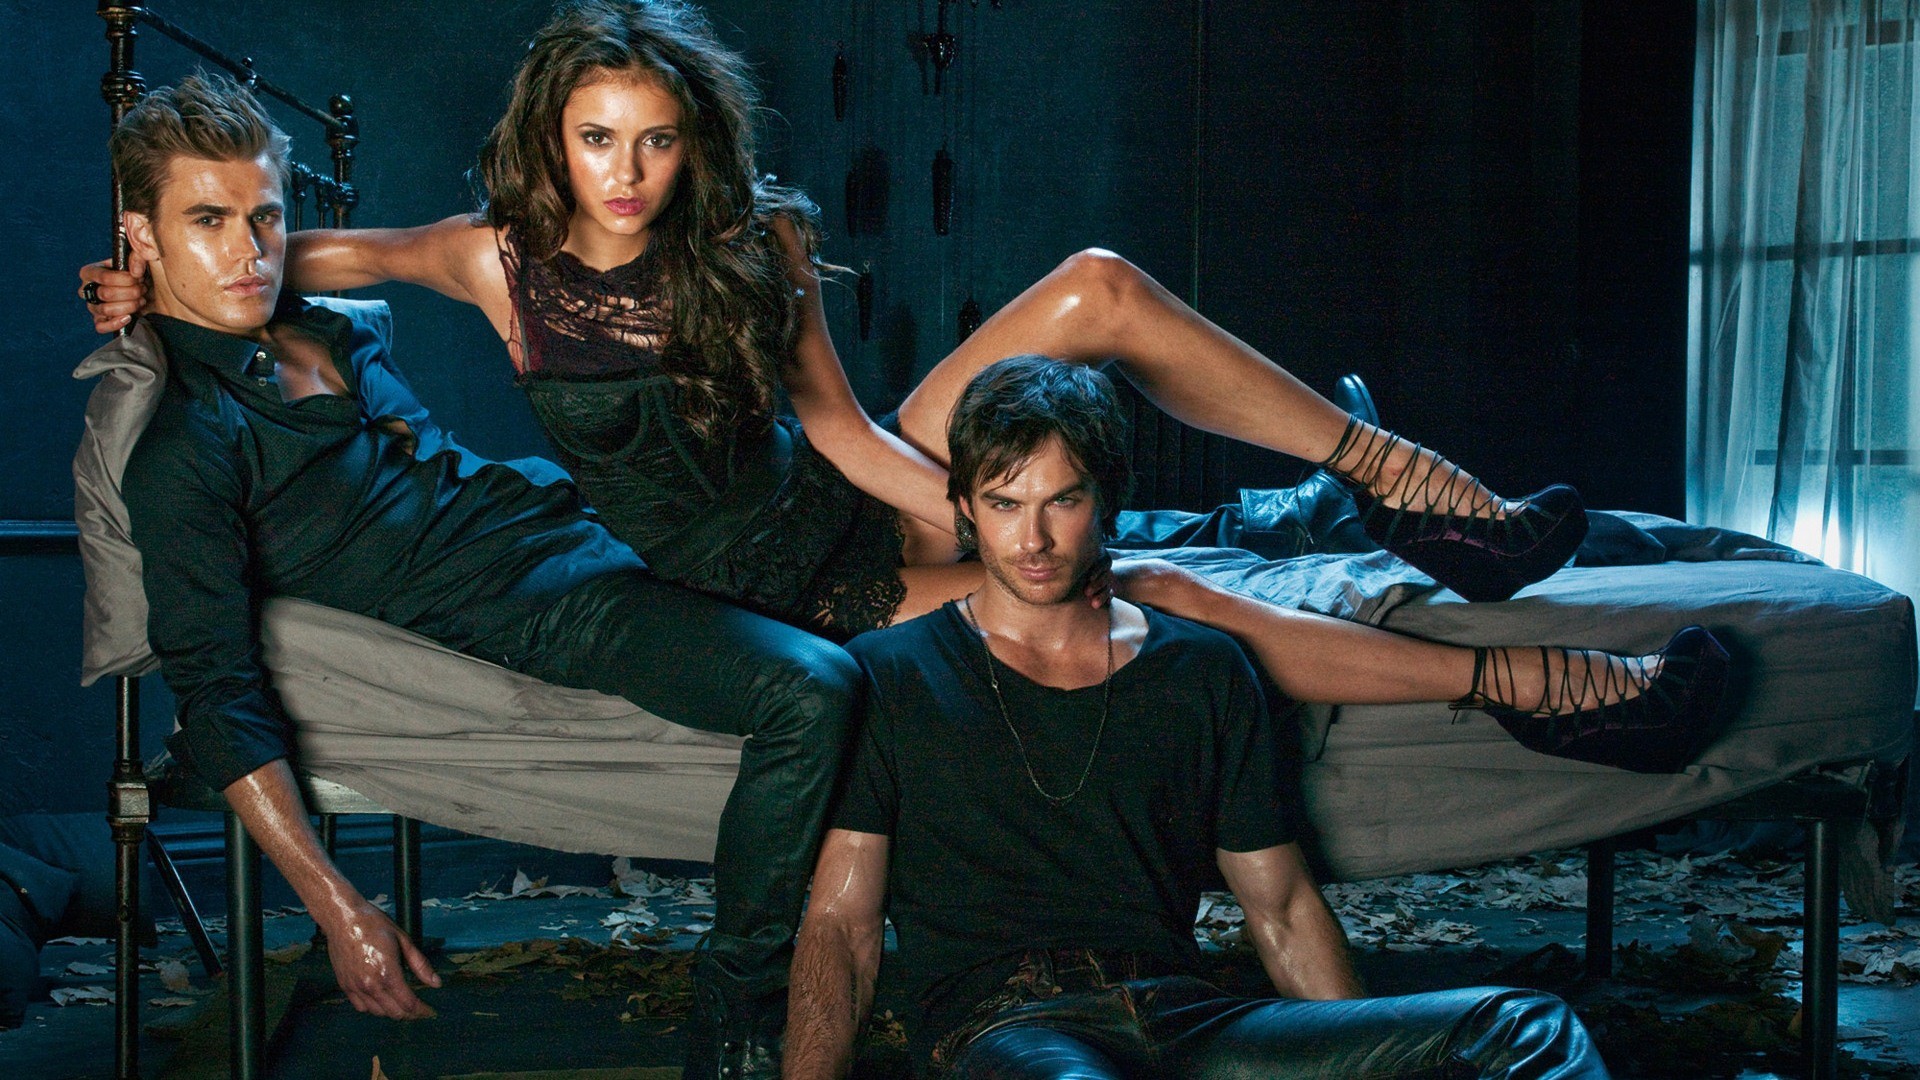 1920x1080 The Vampire Diaries HD Wallpapers #20 - .